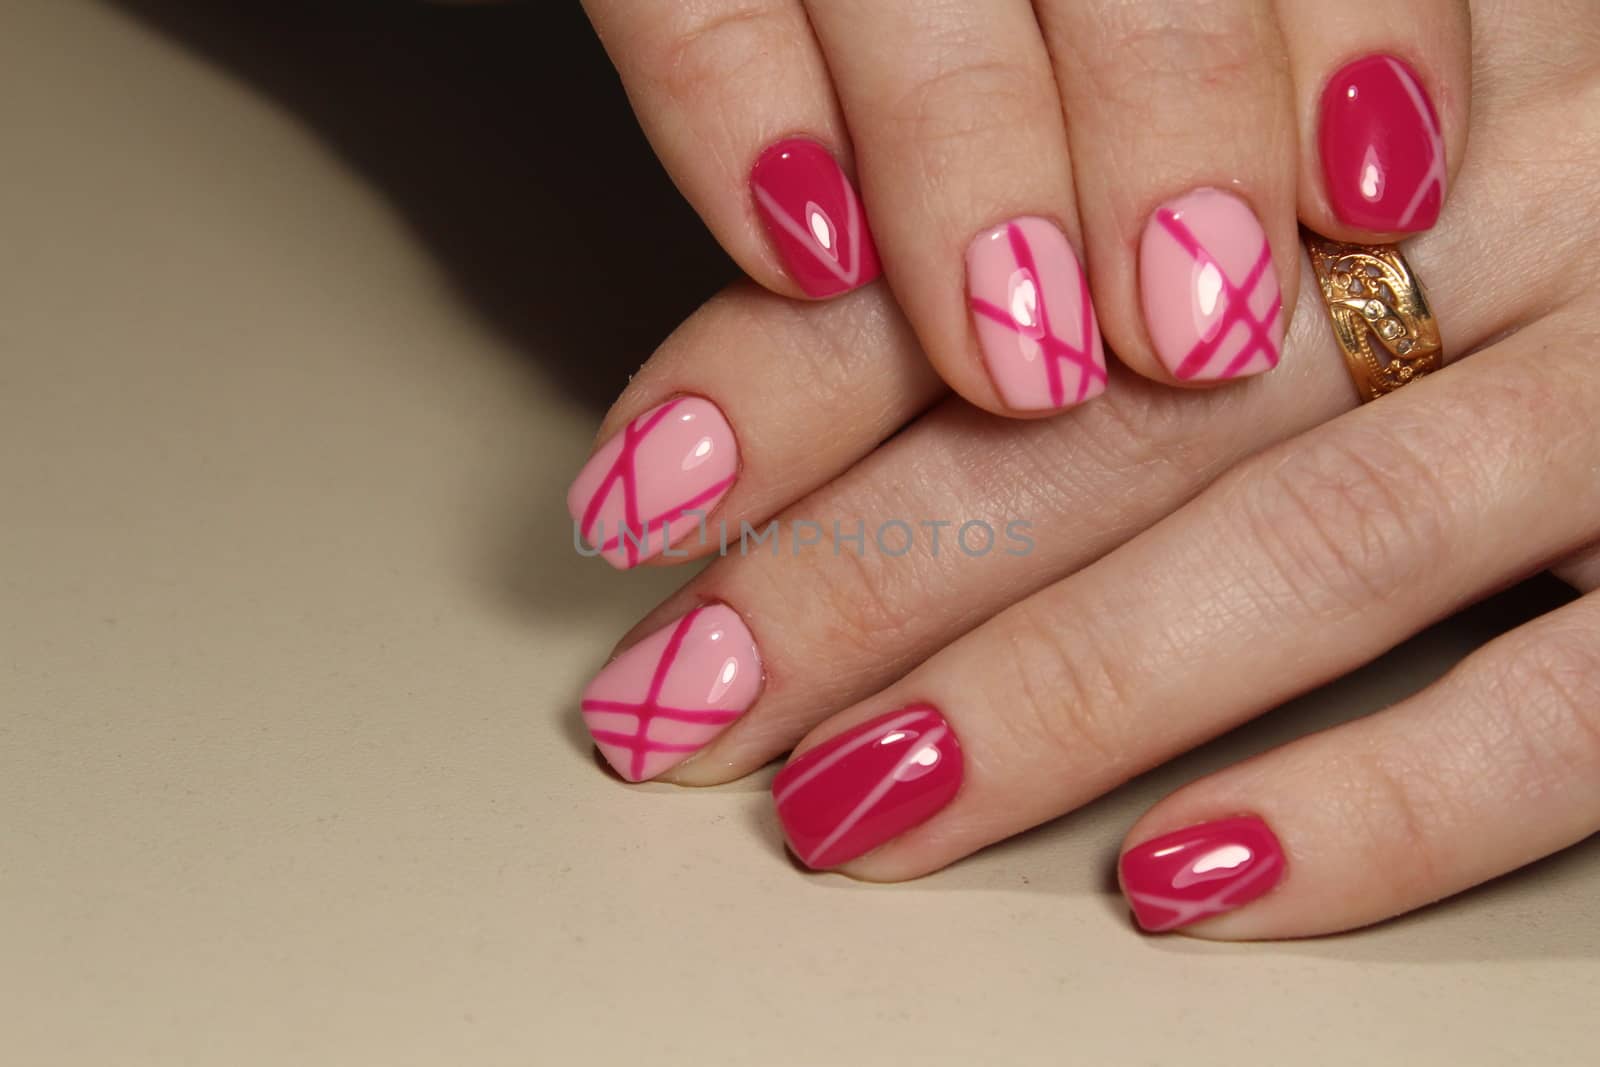 Manicured nails with pink nail polish. by SmirMaxStock